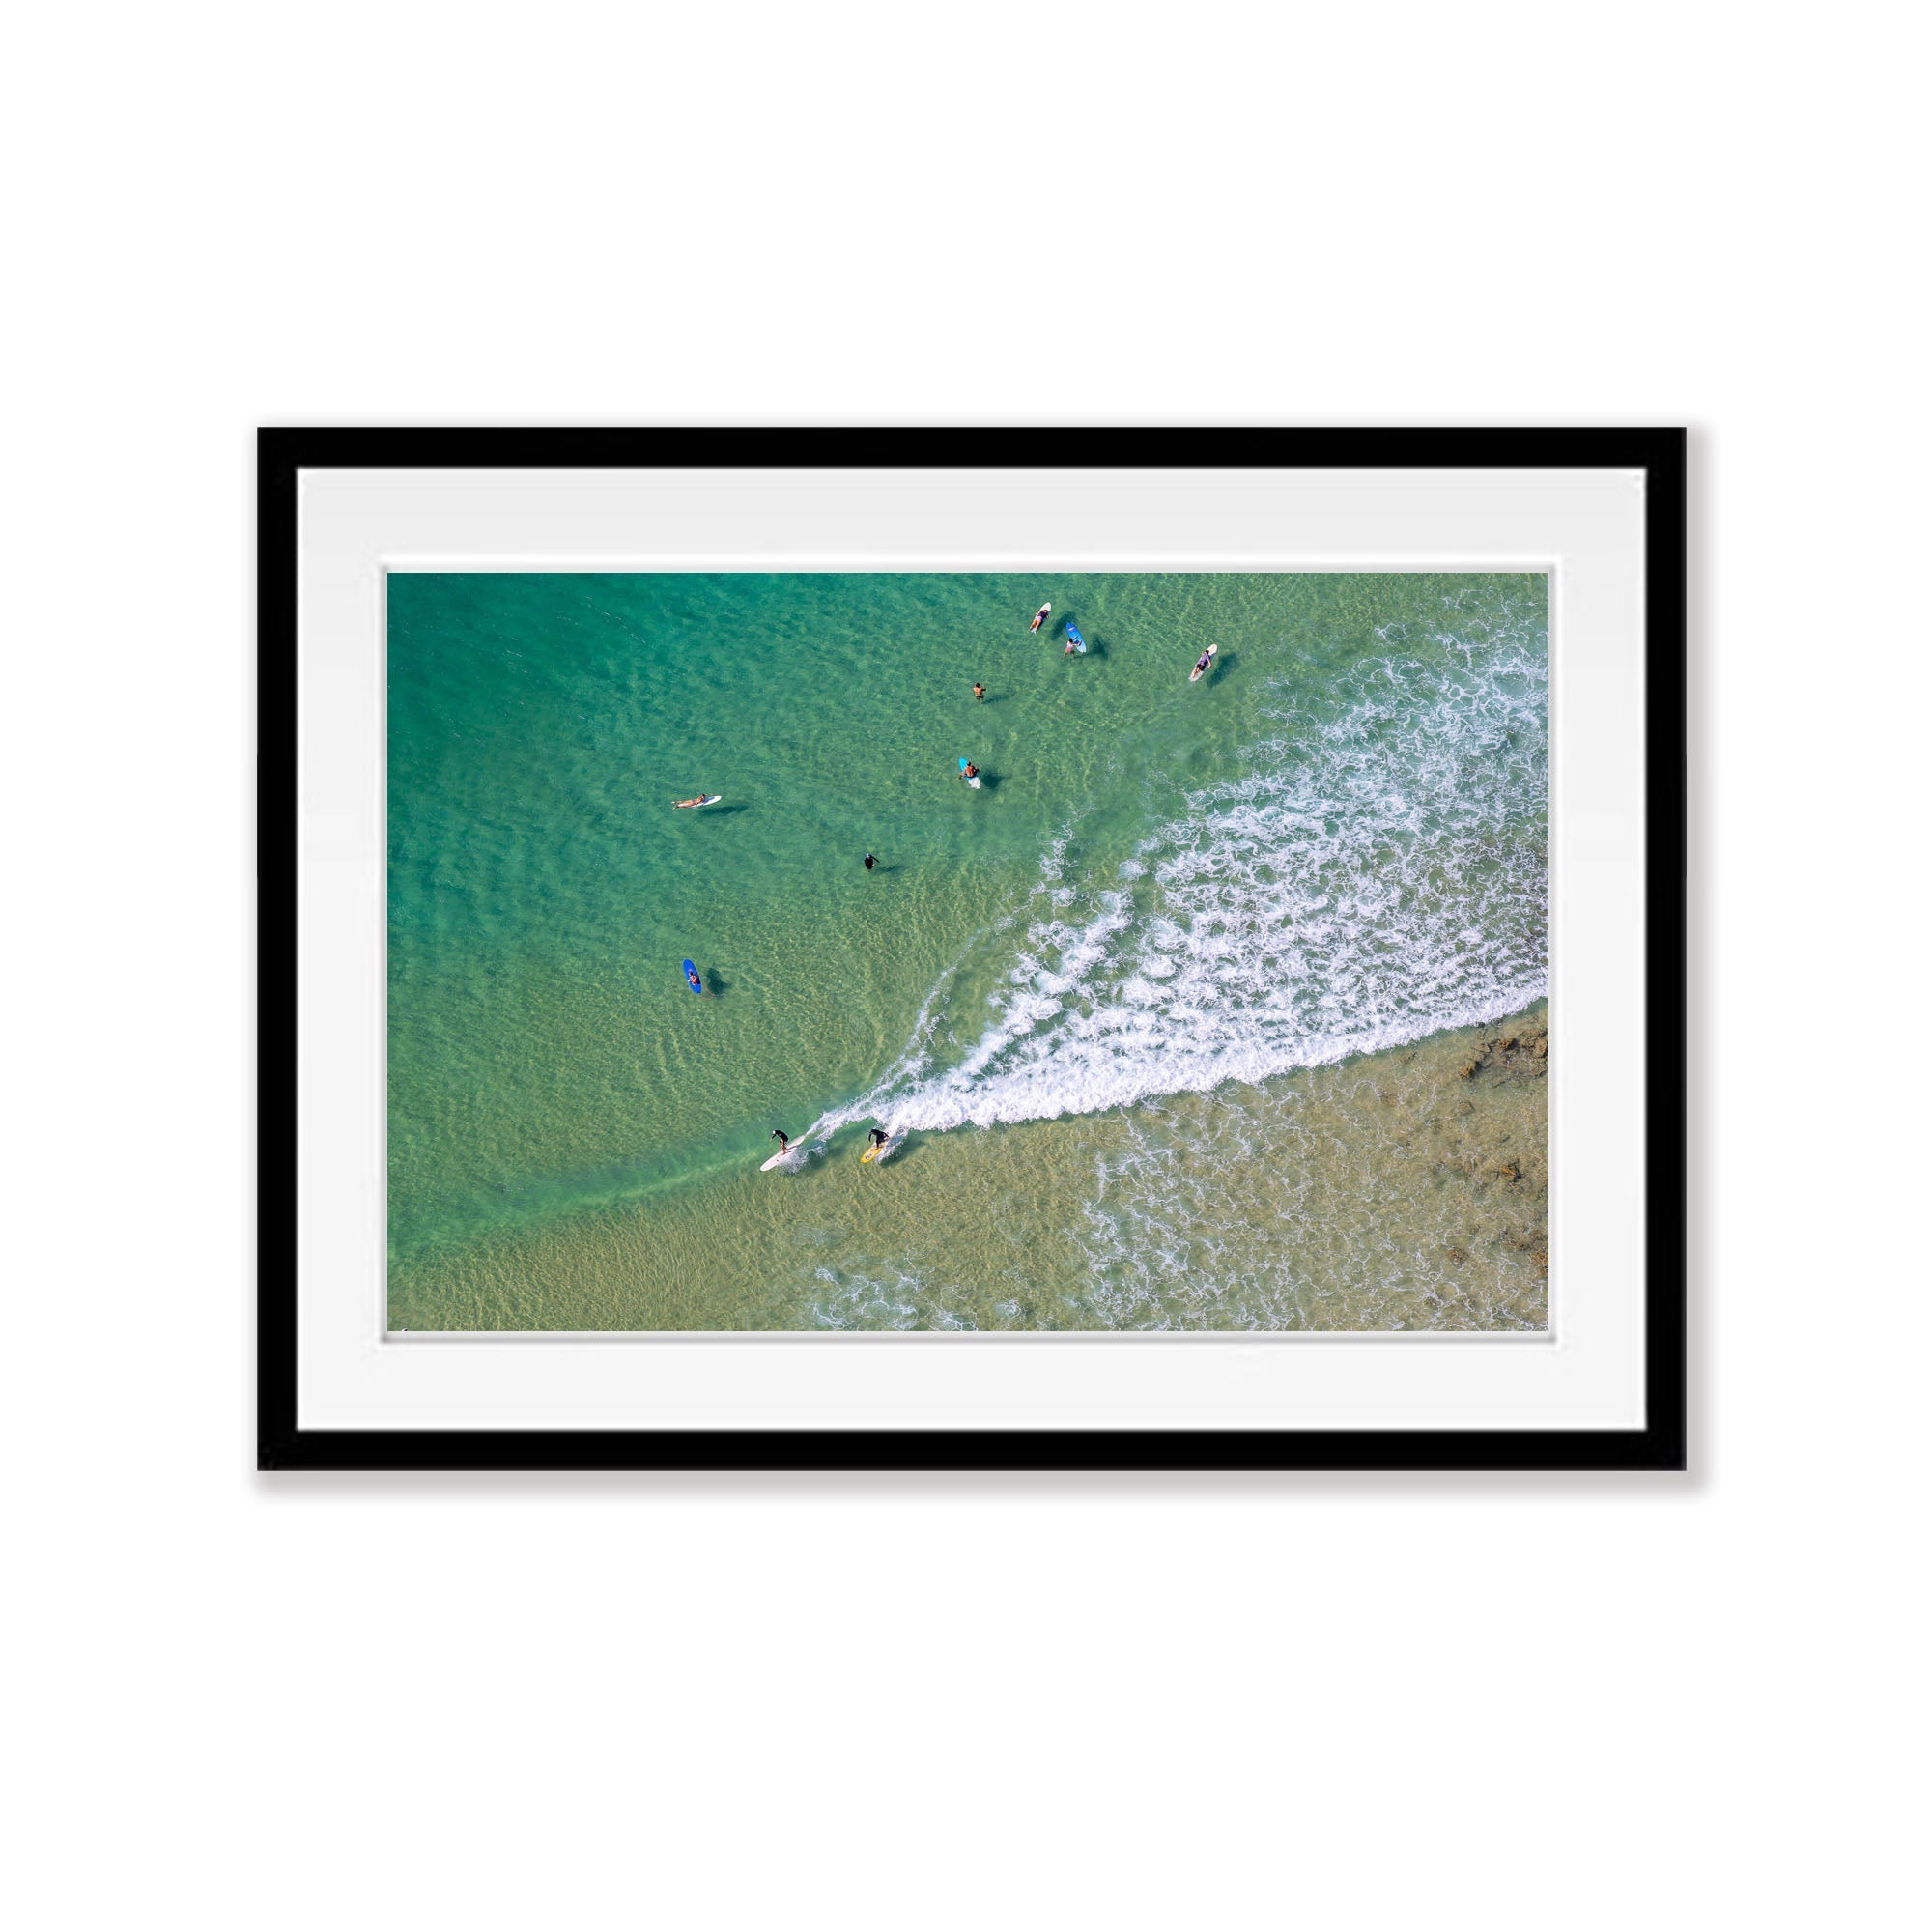 Surfers from above #3, Noosa National Park, Queensland